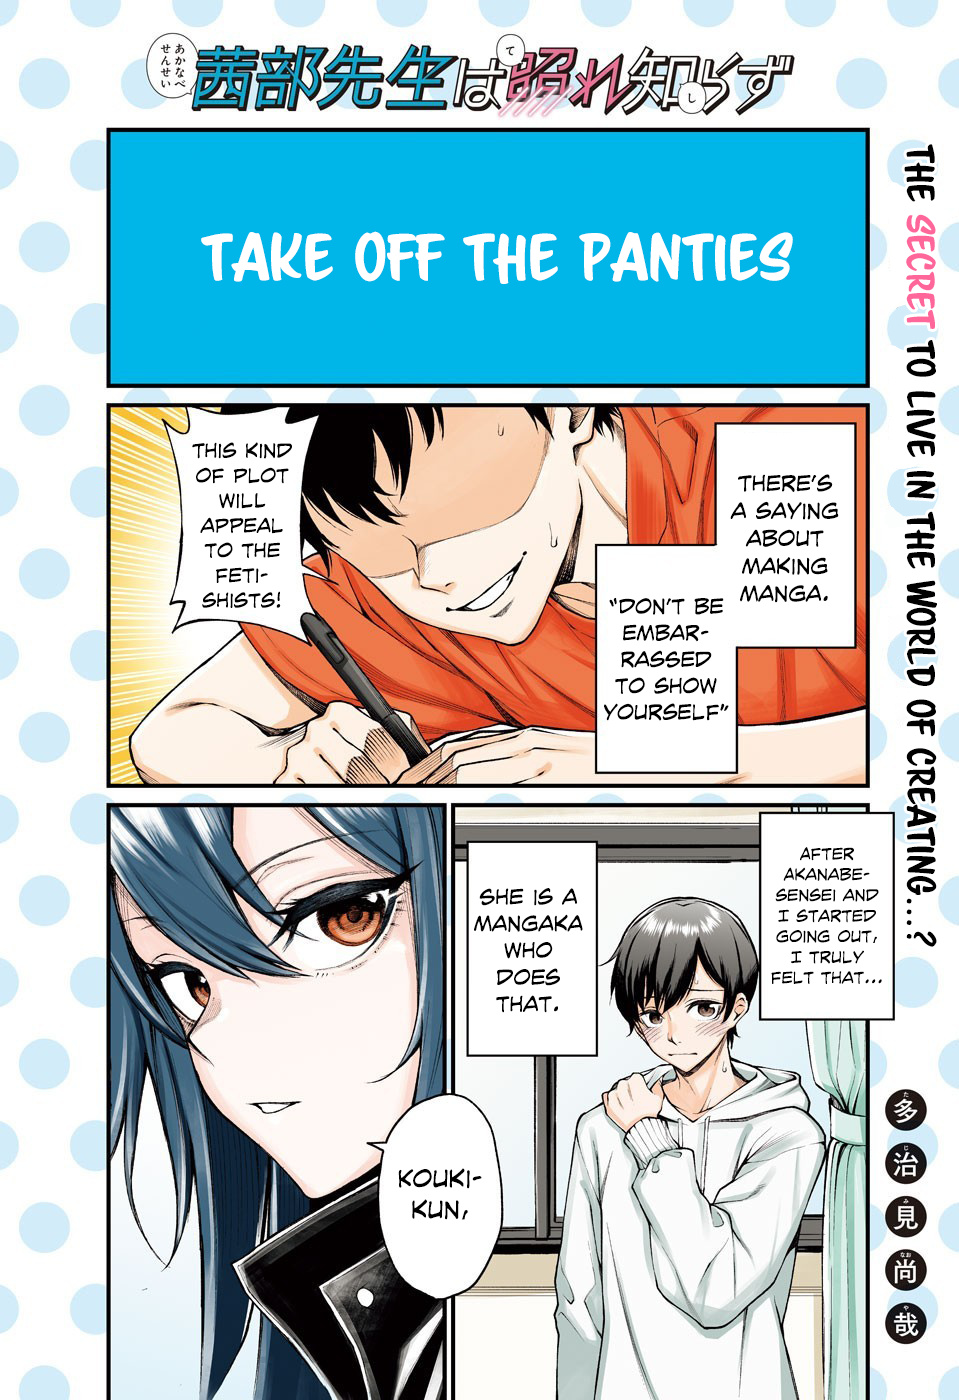 Akanabe-Sensei Doesn't Know About Embarrassment - Page 2